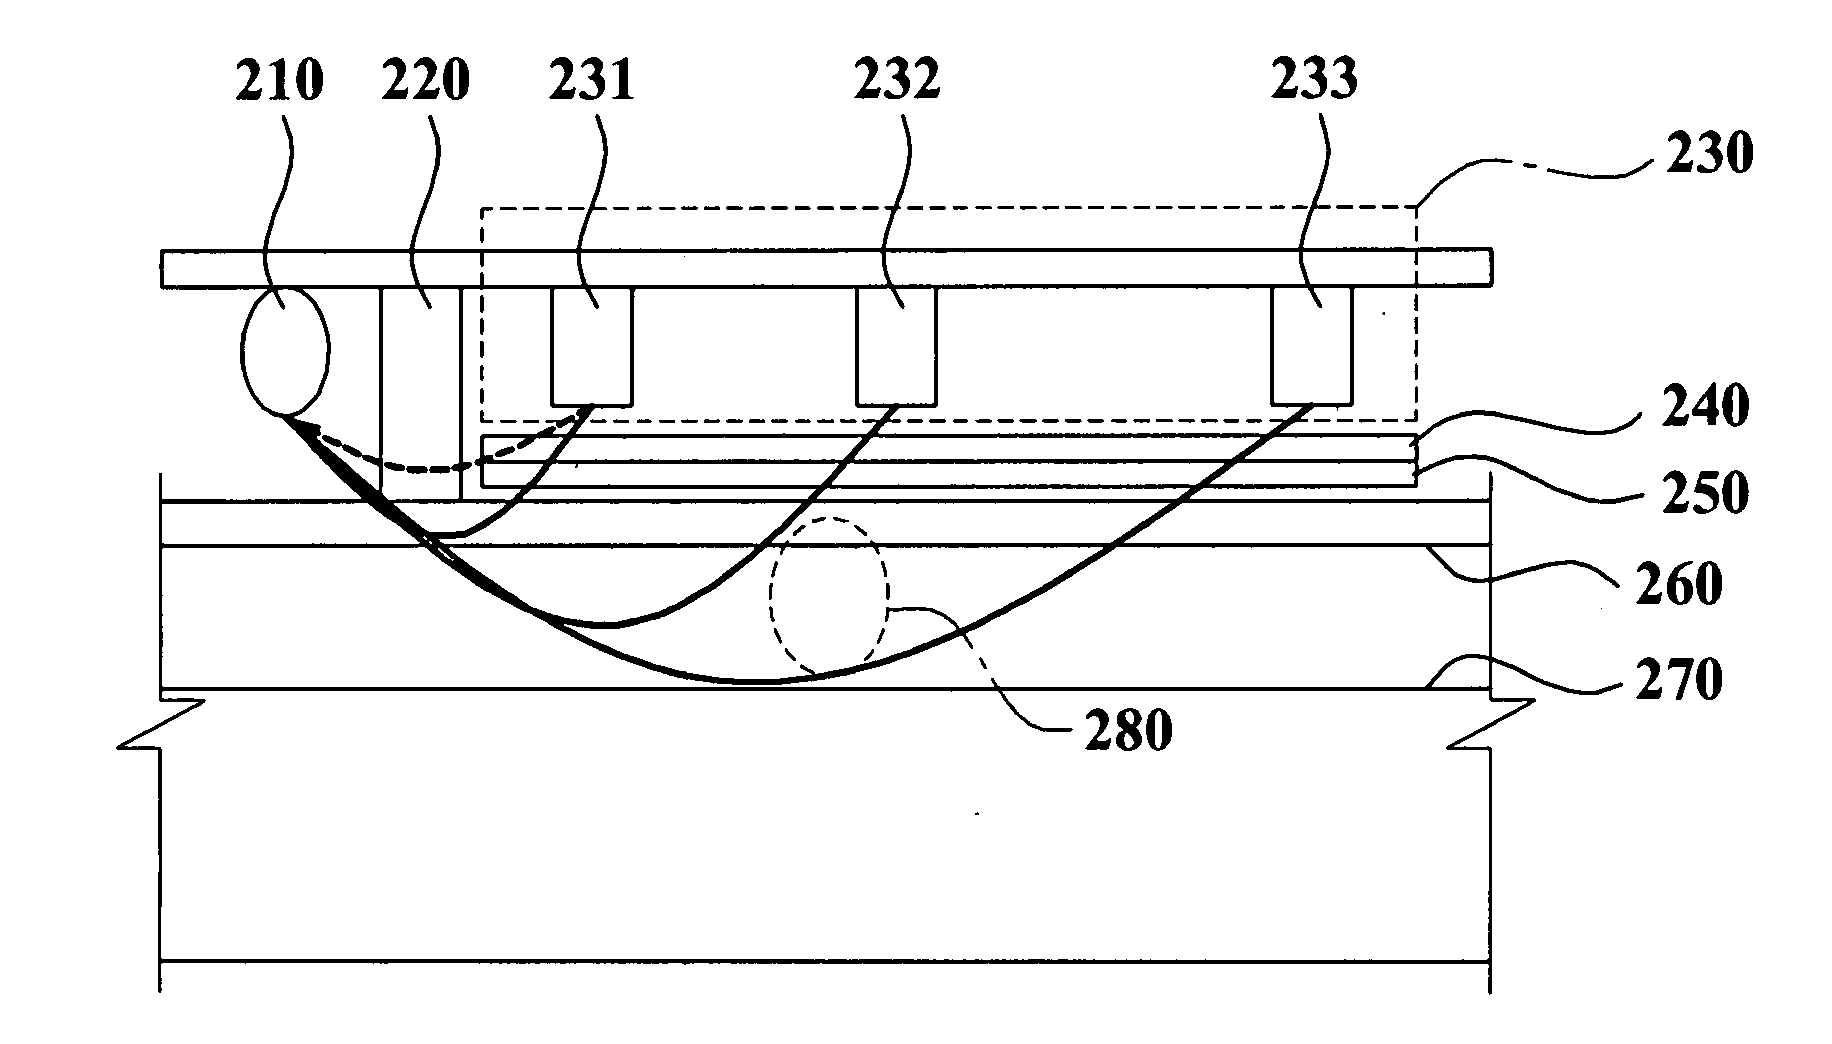 Portable body fat measurement device, method, and medium, using side-view light sources